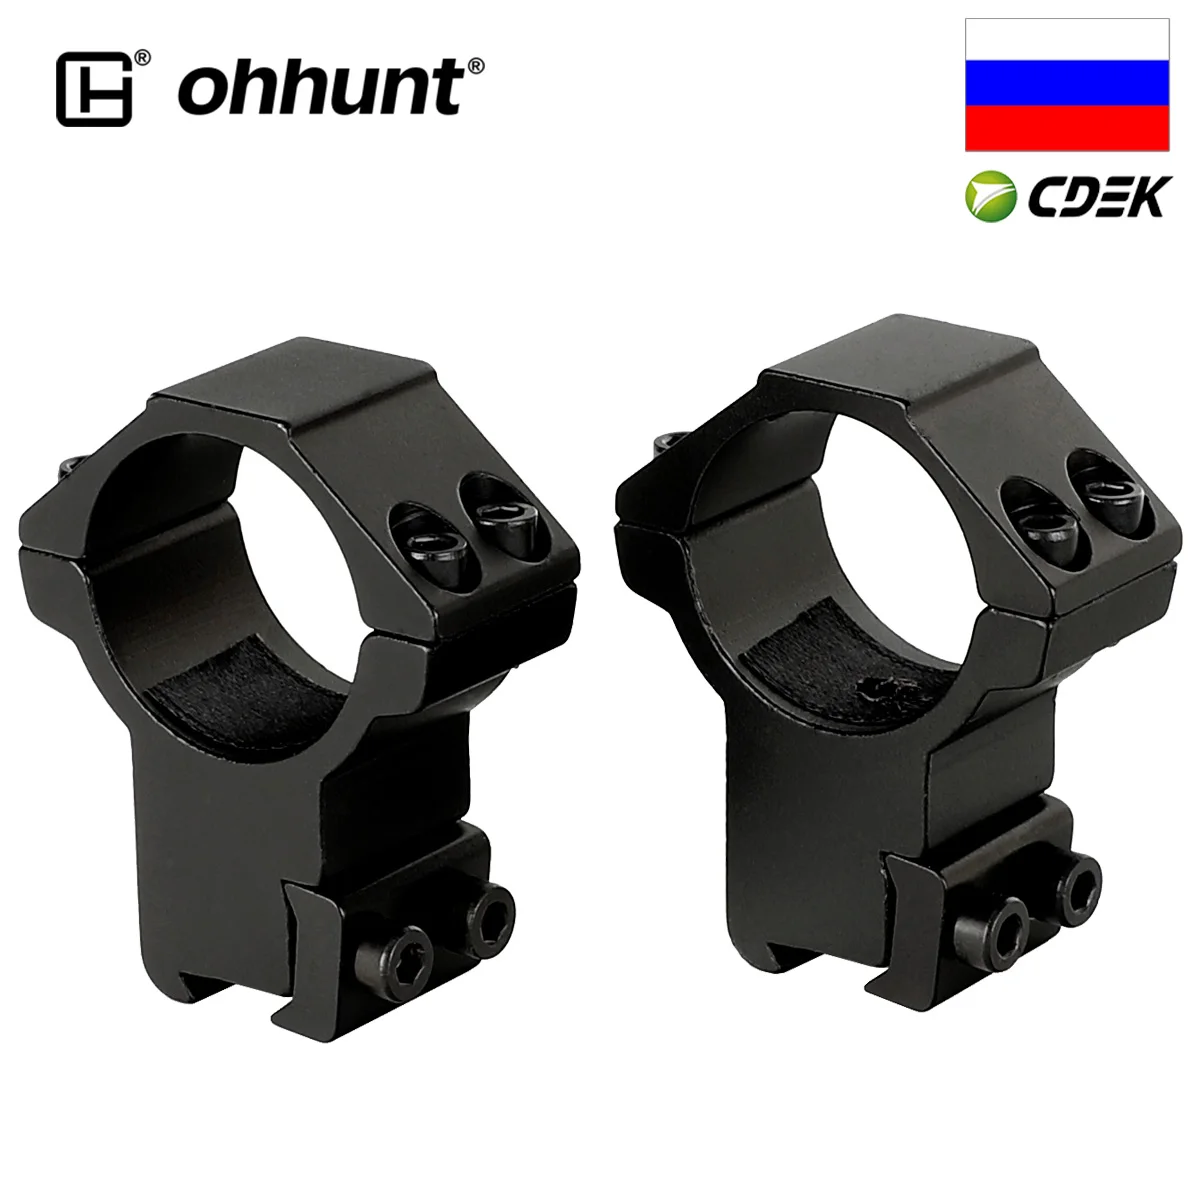 

ohhunt 30mm 2PCs High Profile Airgun Rings w/Stop Pin Dovetail Rings 11mm Rifle Scope Mount Rings Hunting Tactical Accessories